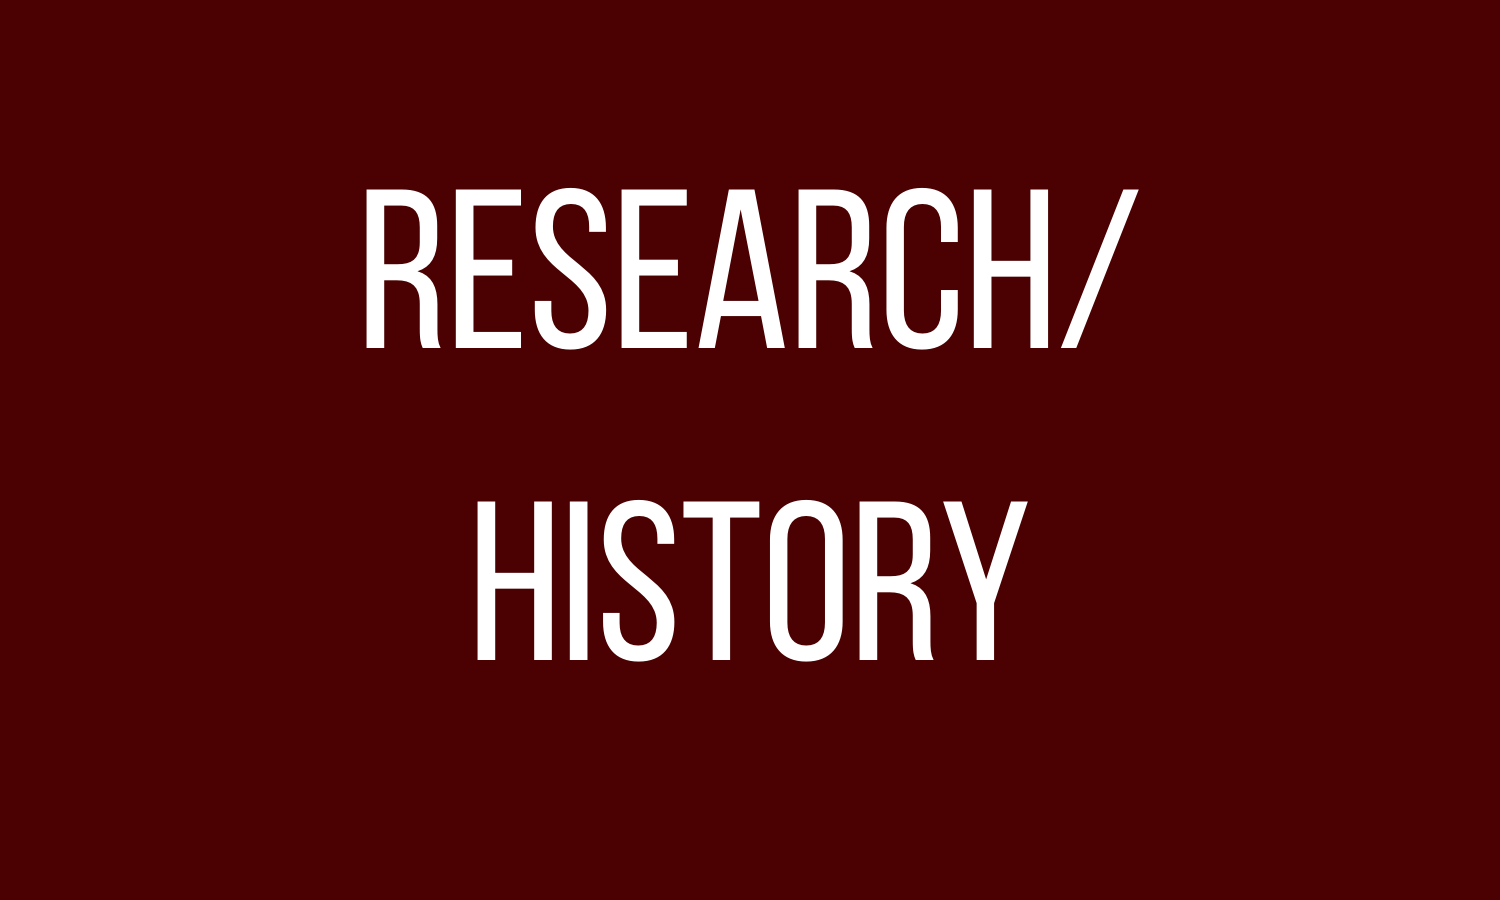 Research/History